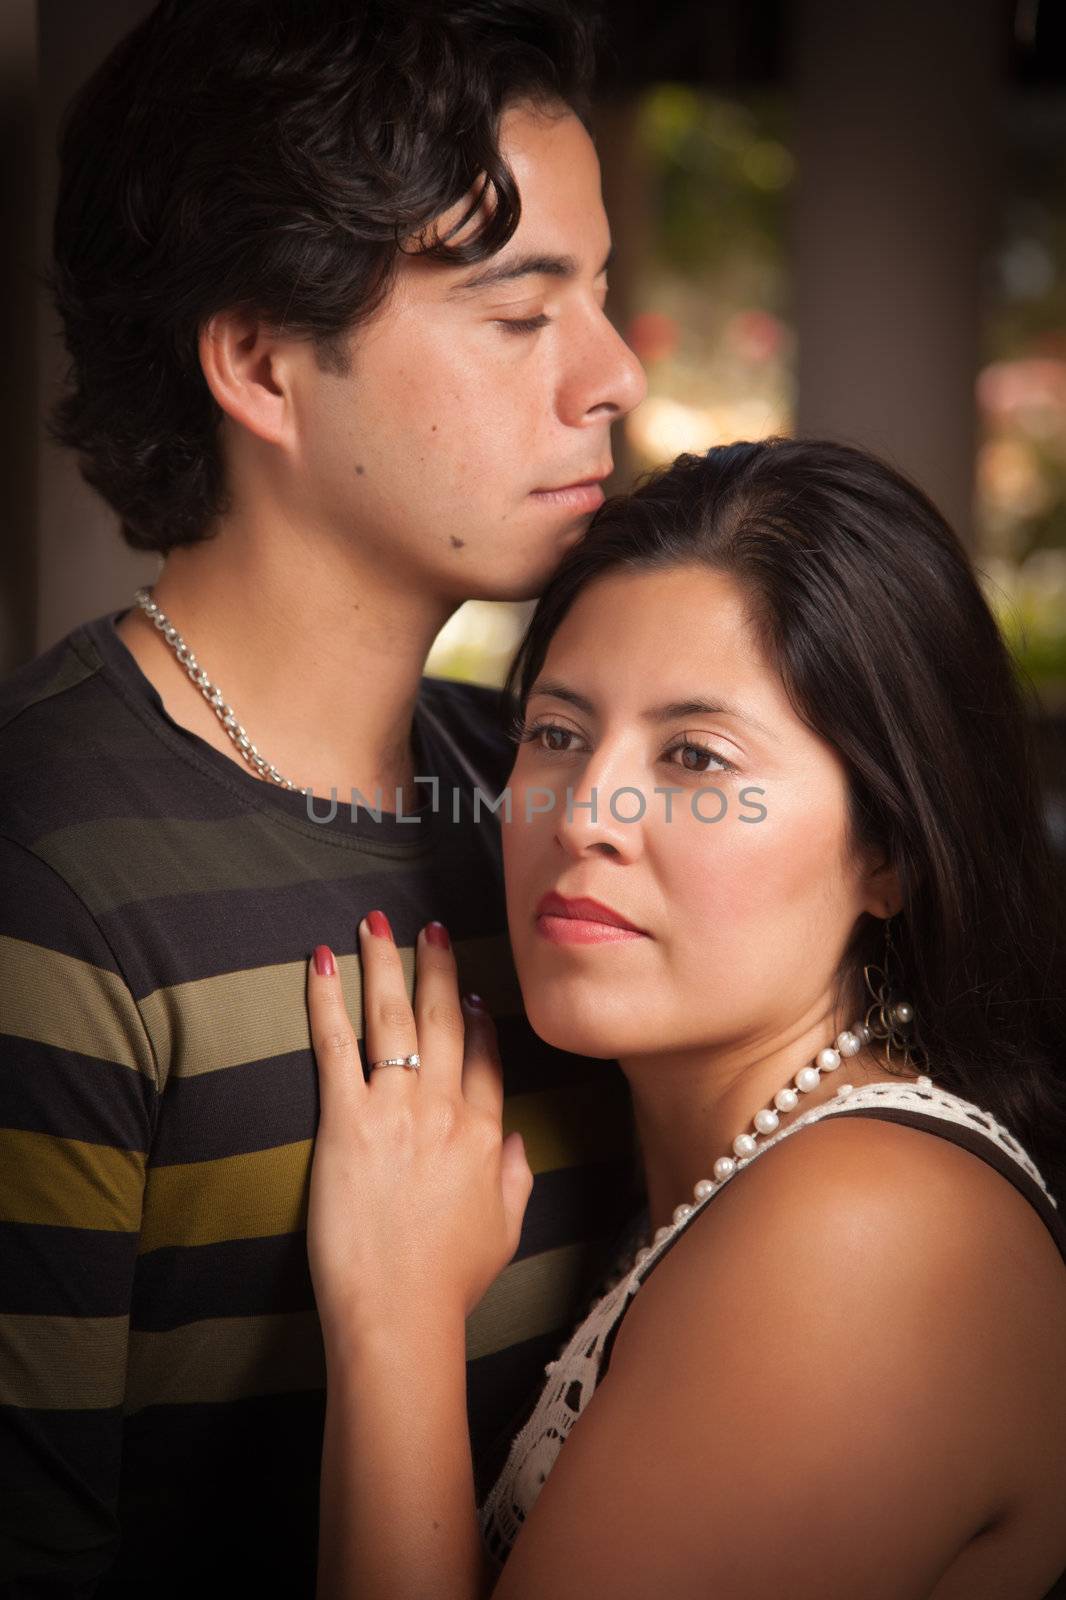 Attractive Hispanic Couple Portrait Outdoors by Feverpitched